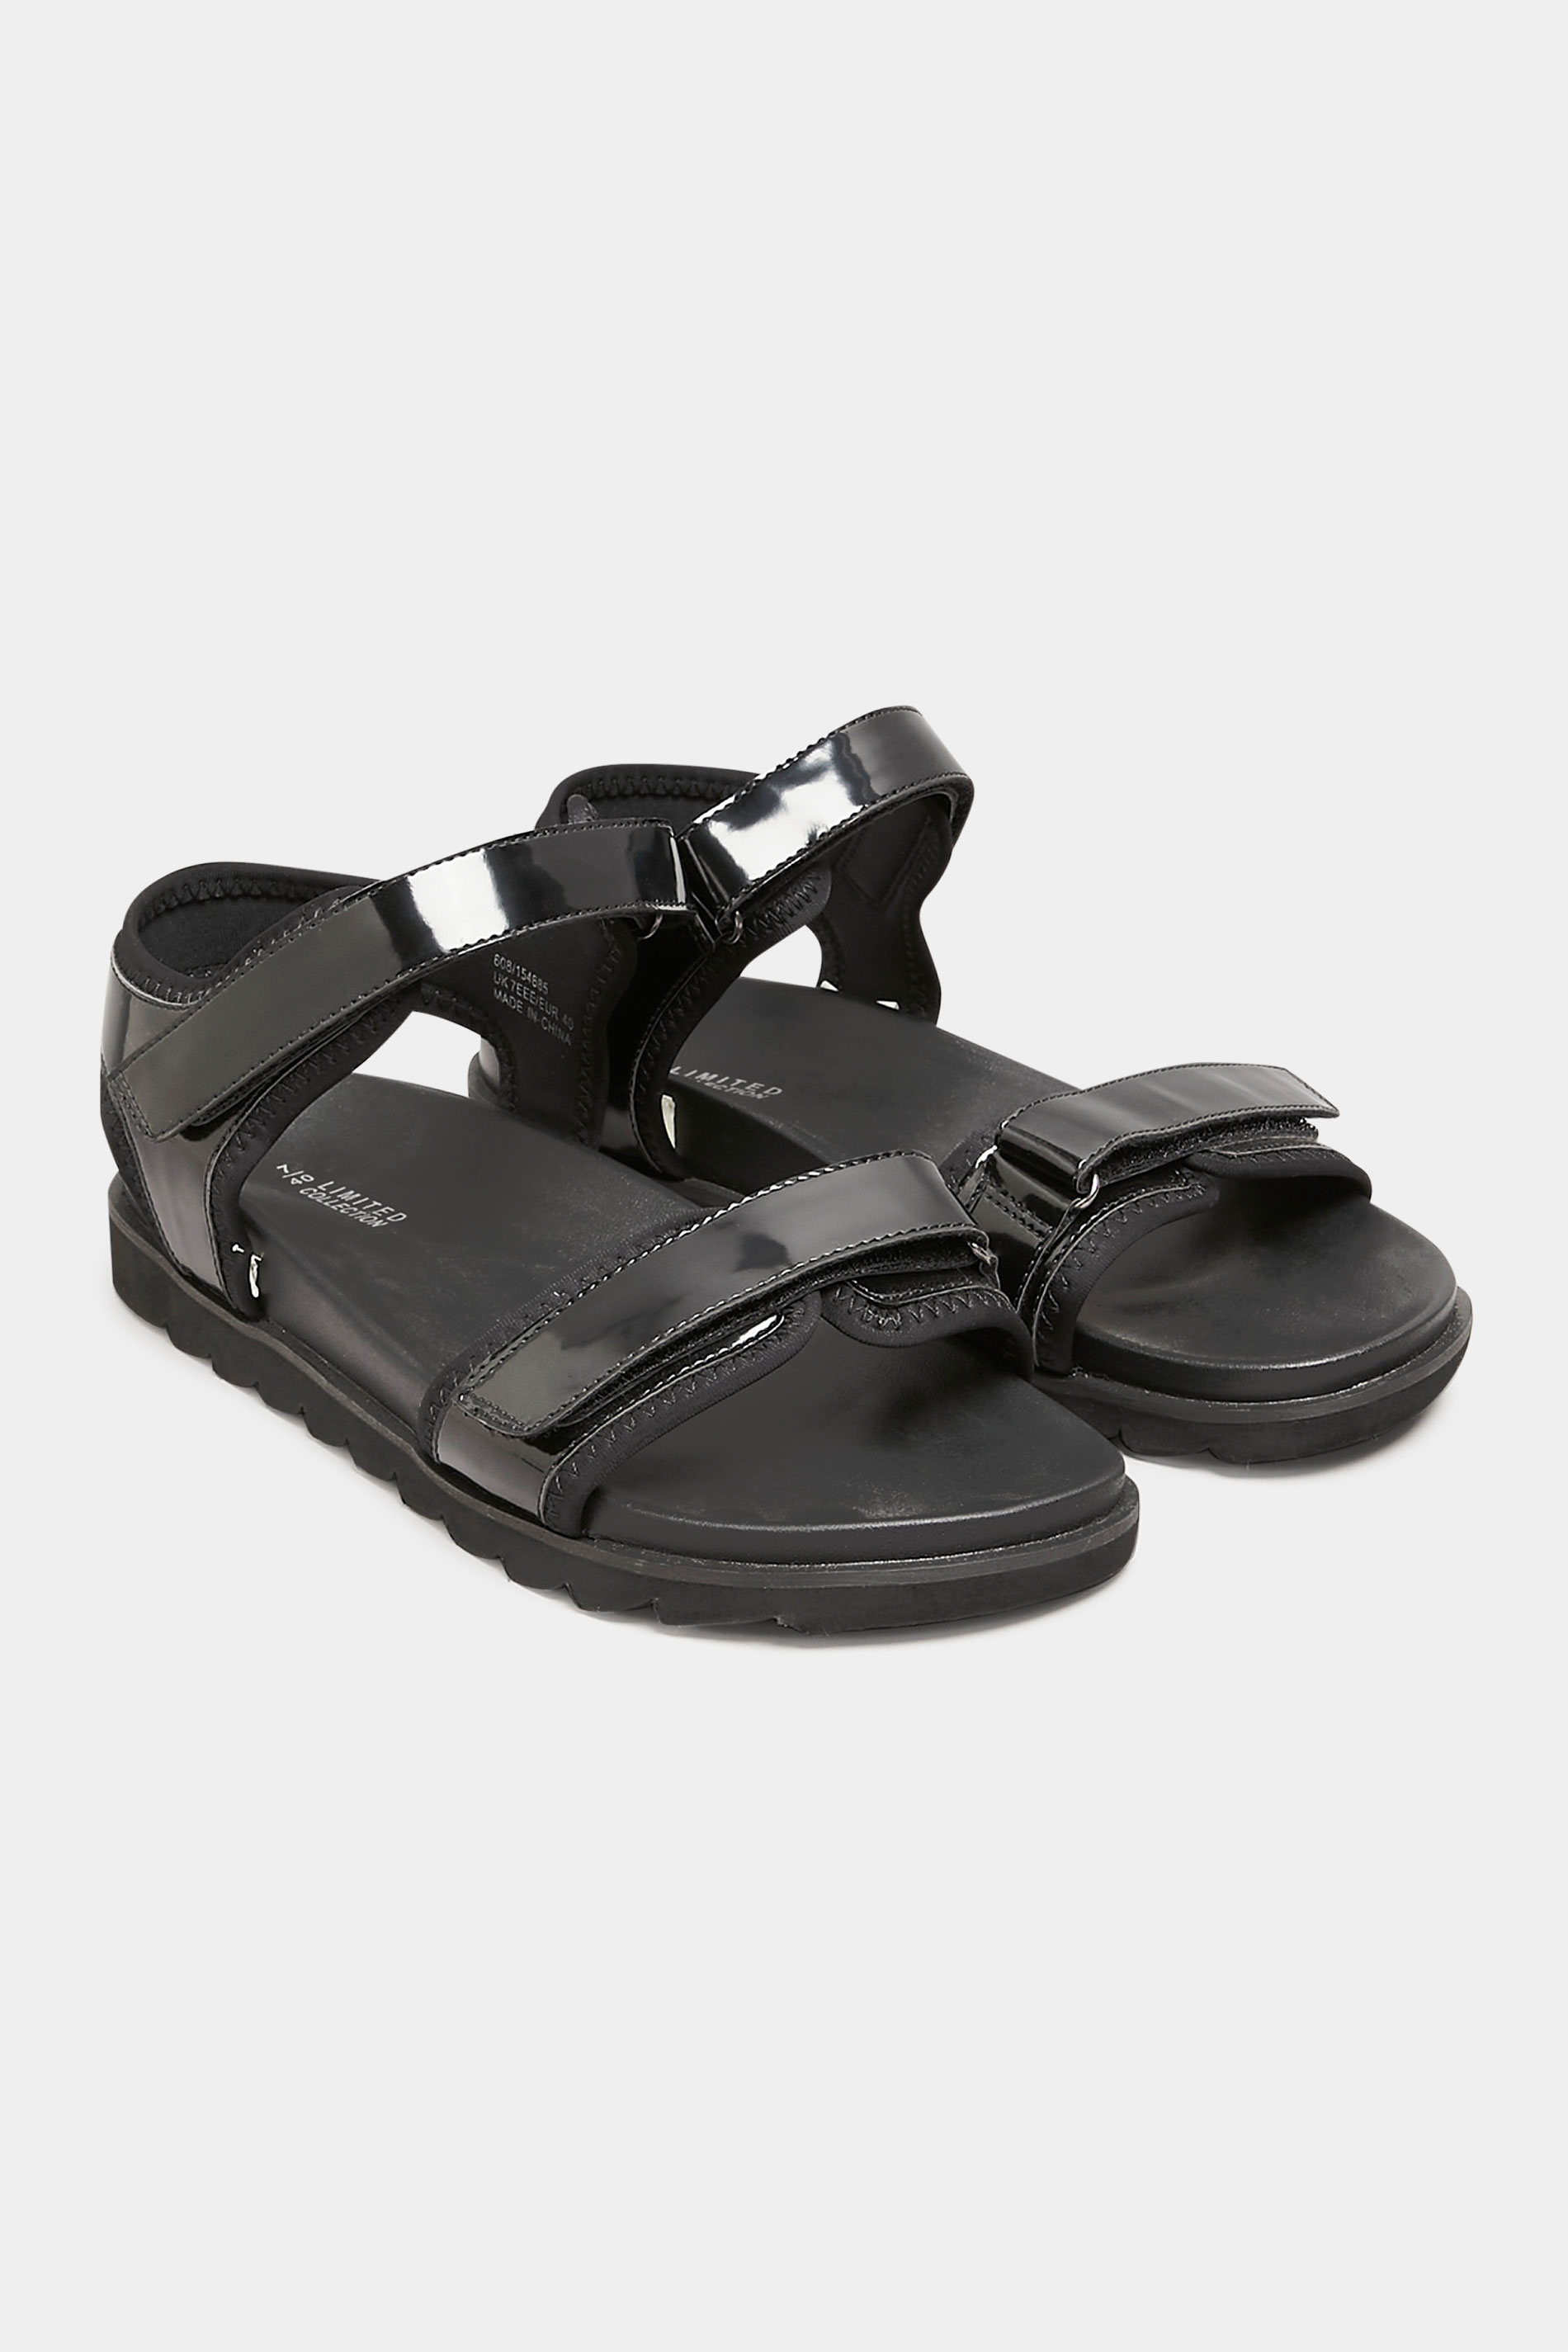 Chaussures Pieds Larges Sandales Pieds Larges | Sandales Noires Vernies Pieds Extra Larges EEE - HM20122